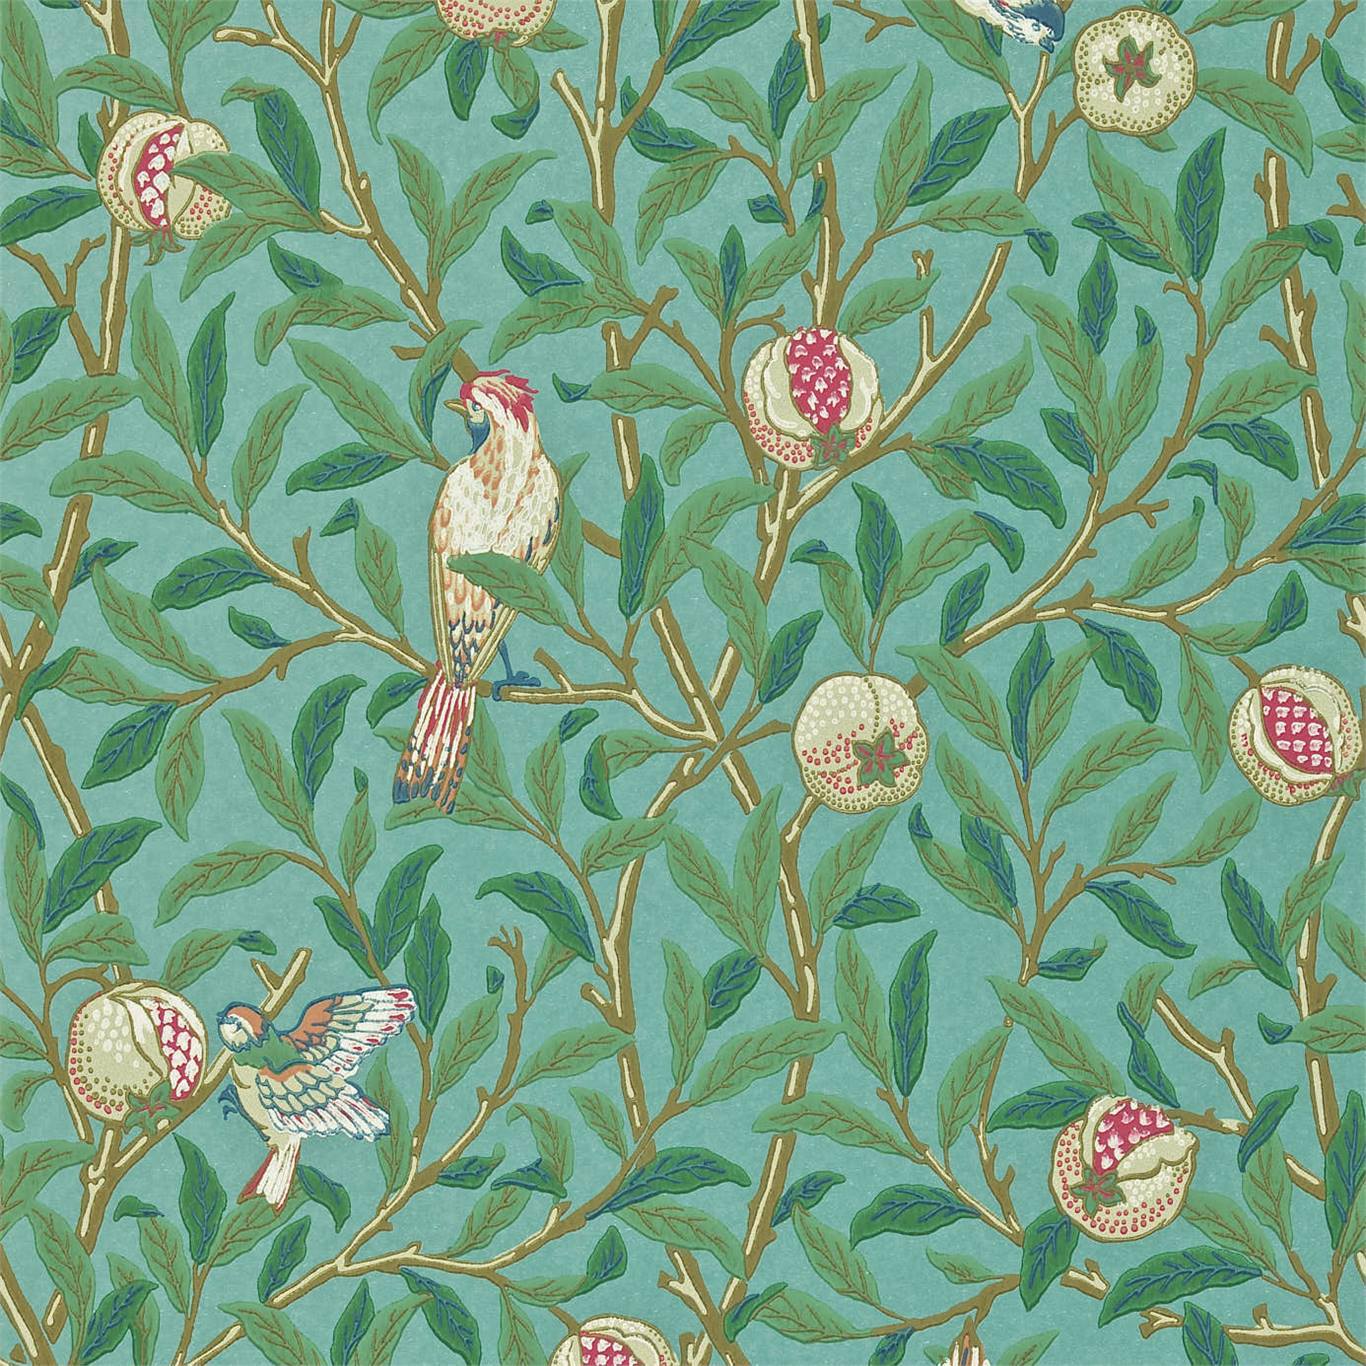 William Morris Bird And Pomegranate Wallpaper DCMW216820 by Morris & Co